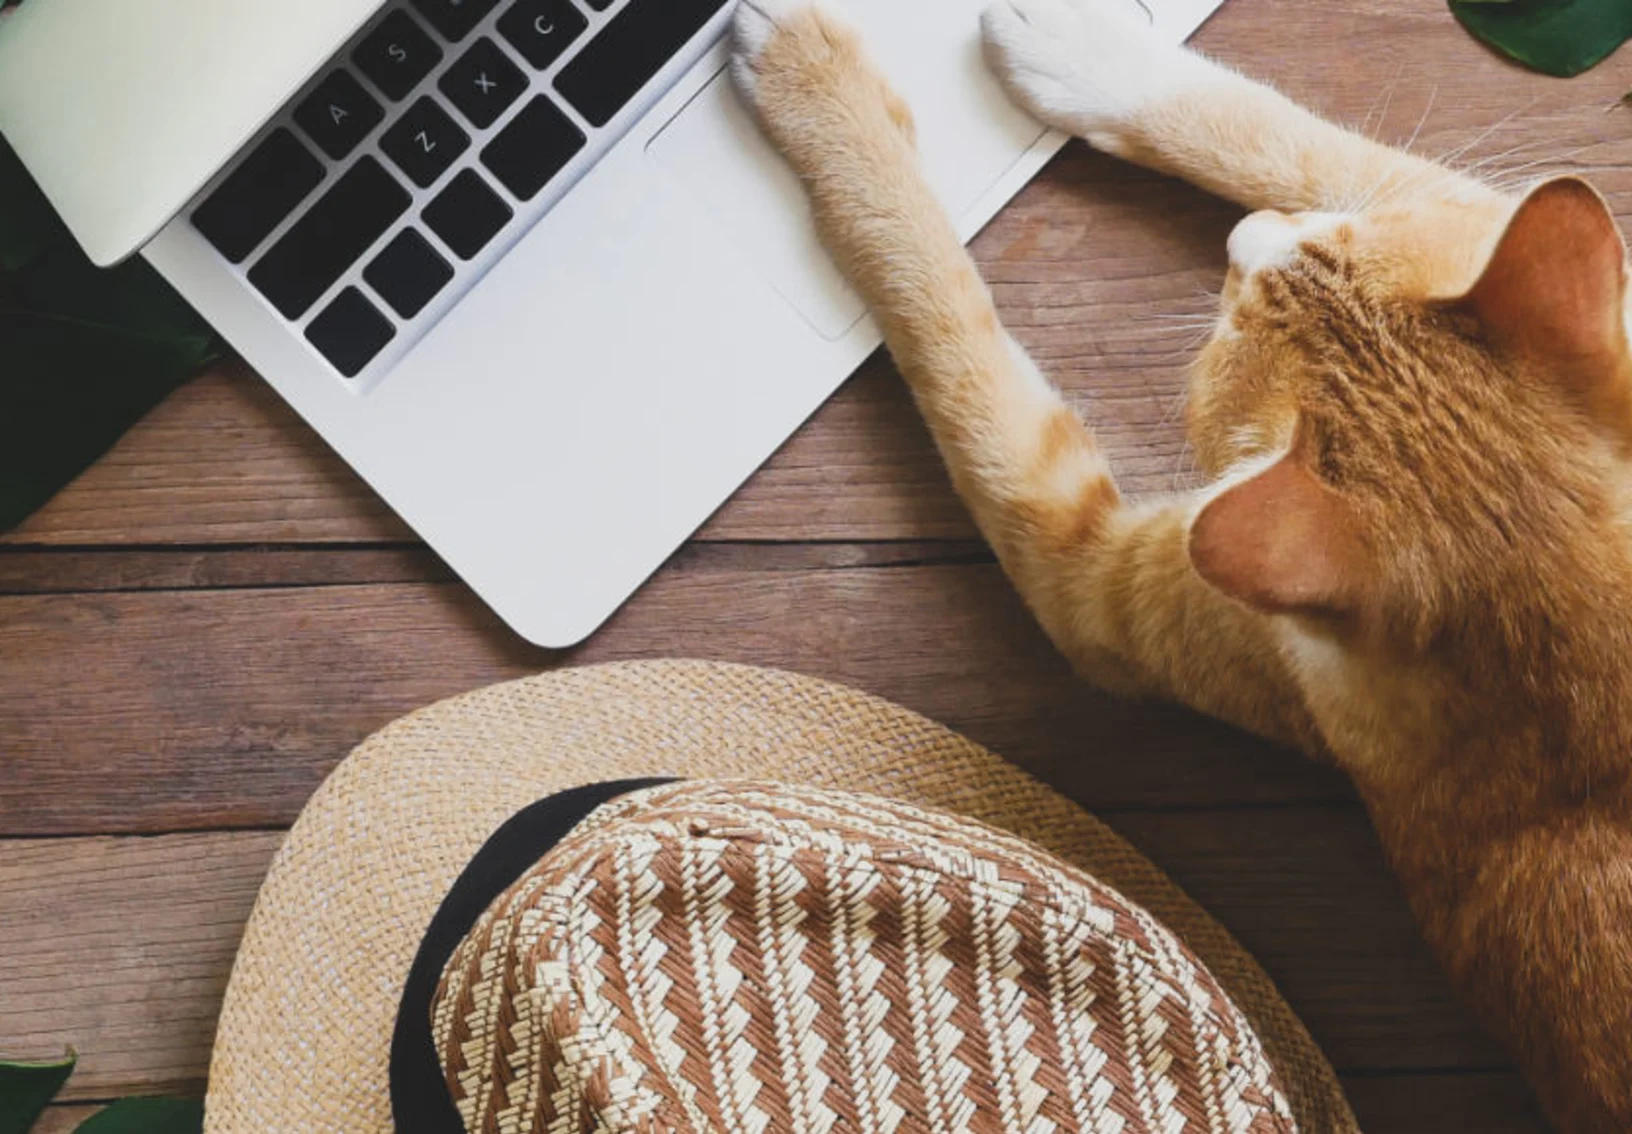 Orange cat laying on computer next to hat and leaves